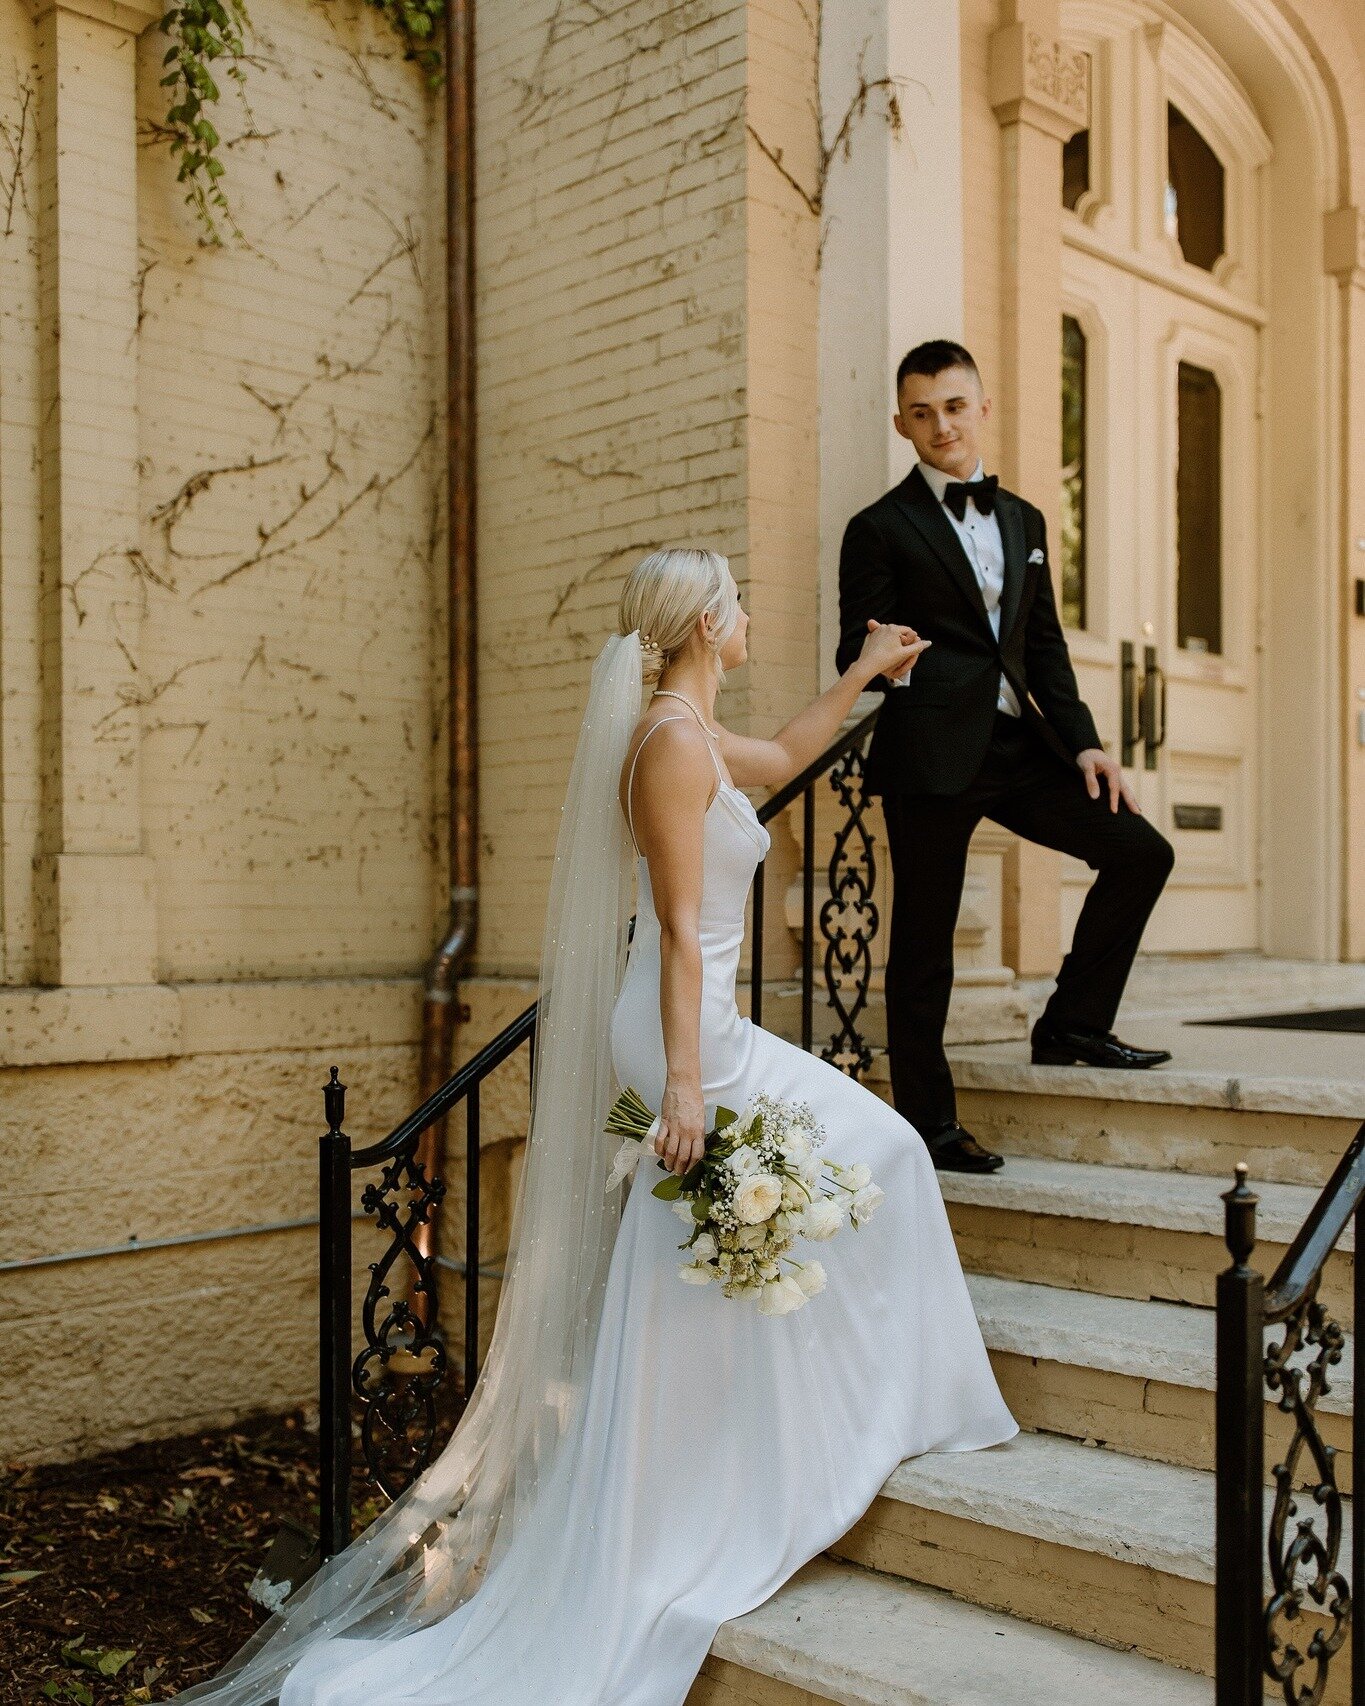 Only a few steps up before you're inside our elegant, historic mansion rooted in downtown Milwaukee's East Side neighborhood. Step inside and you'll see our ballroom, parlors, and so much more!

Photo by Kaleigh Rae Photography